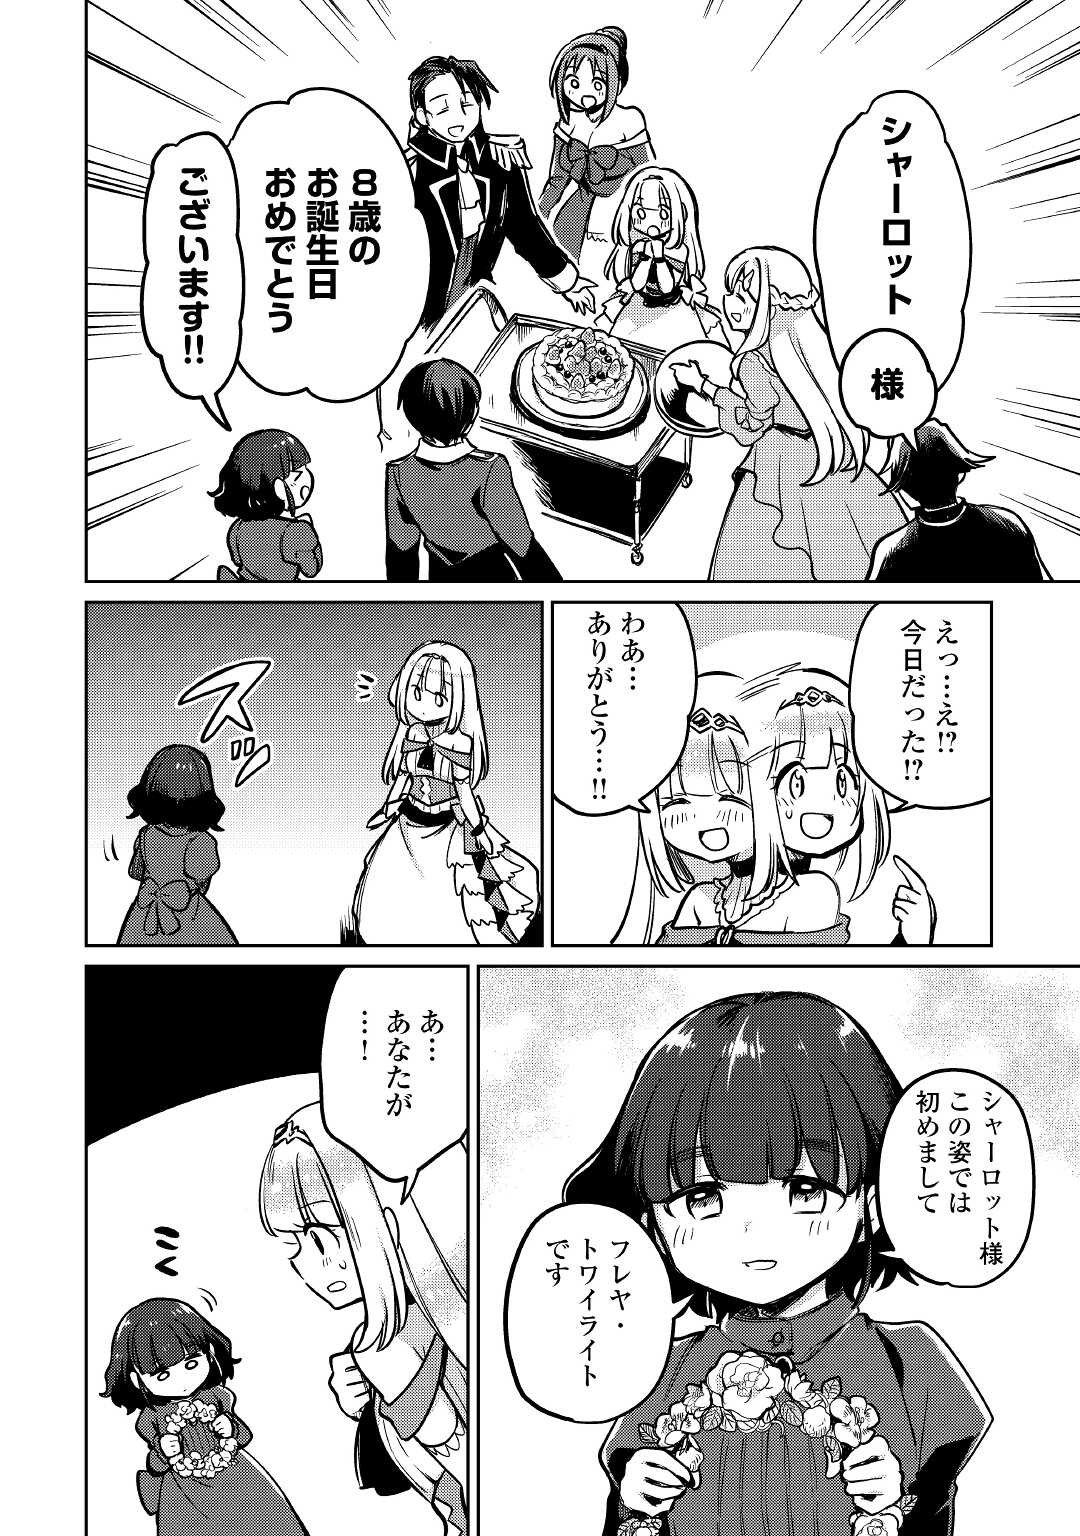 The Former Structural Researcher’s Story of Otherworldly Adventure 第42話 - Page 14